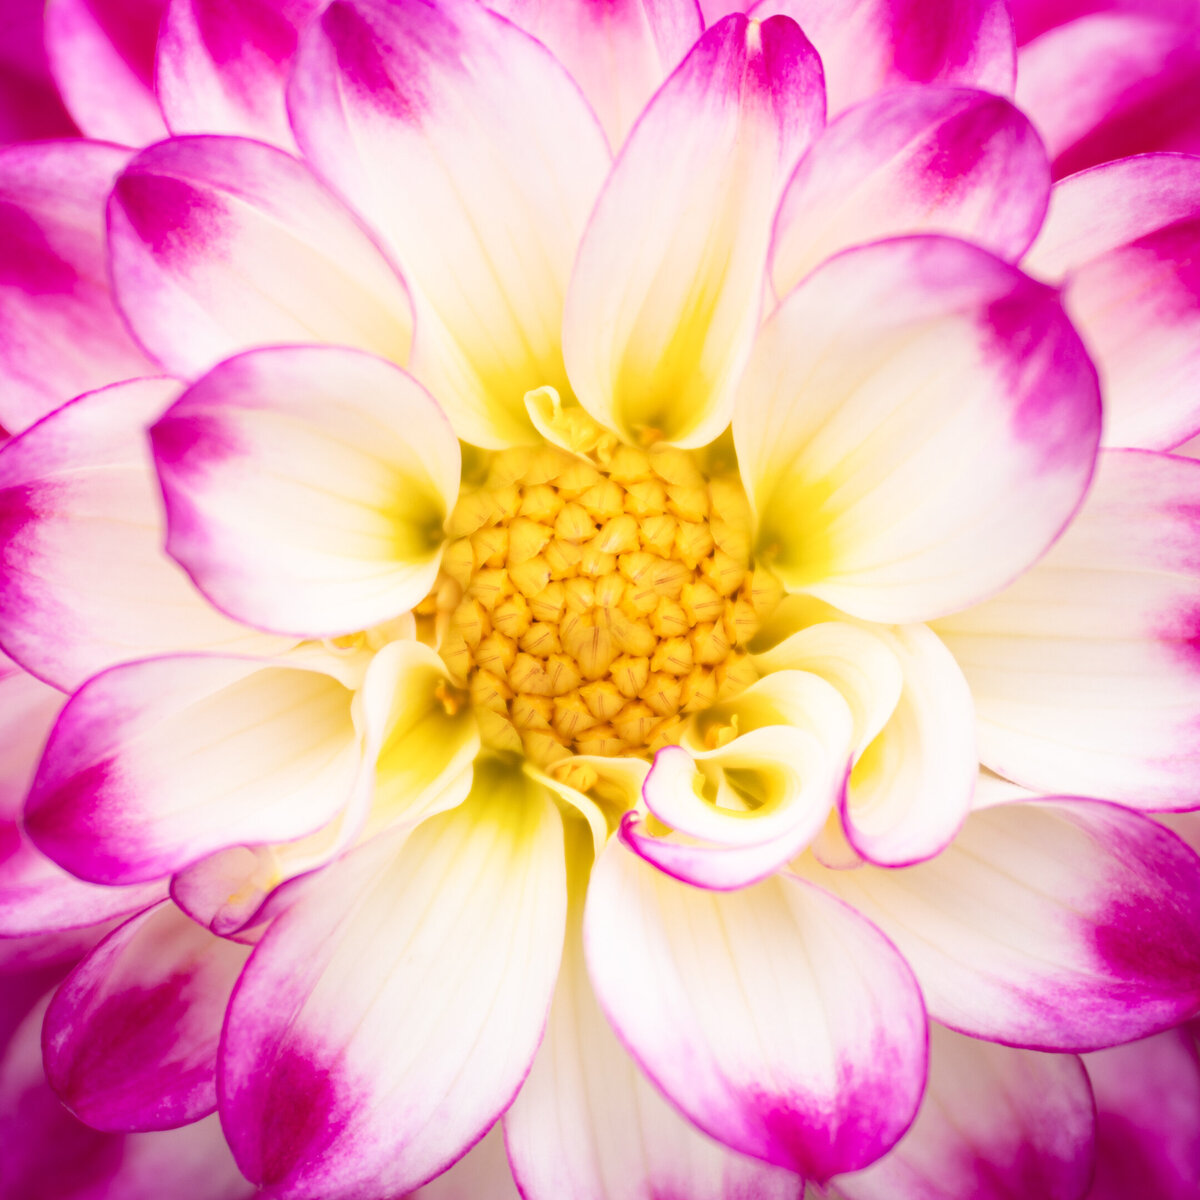 Macro photo of a white and pink dahlia bloom with a yellow center.